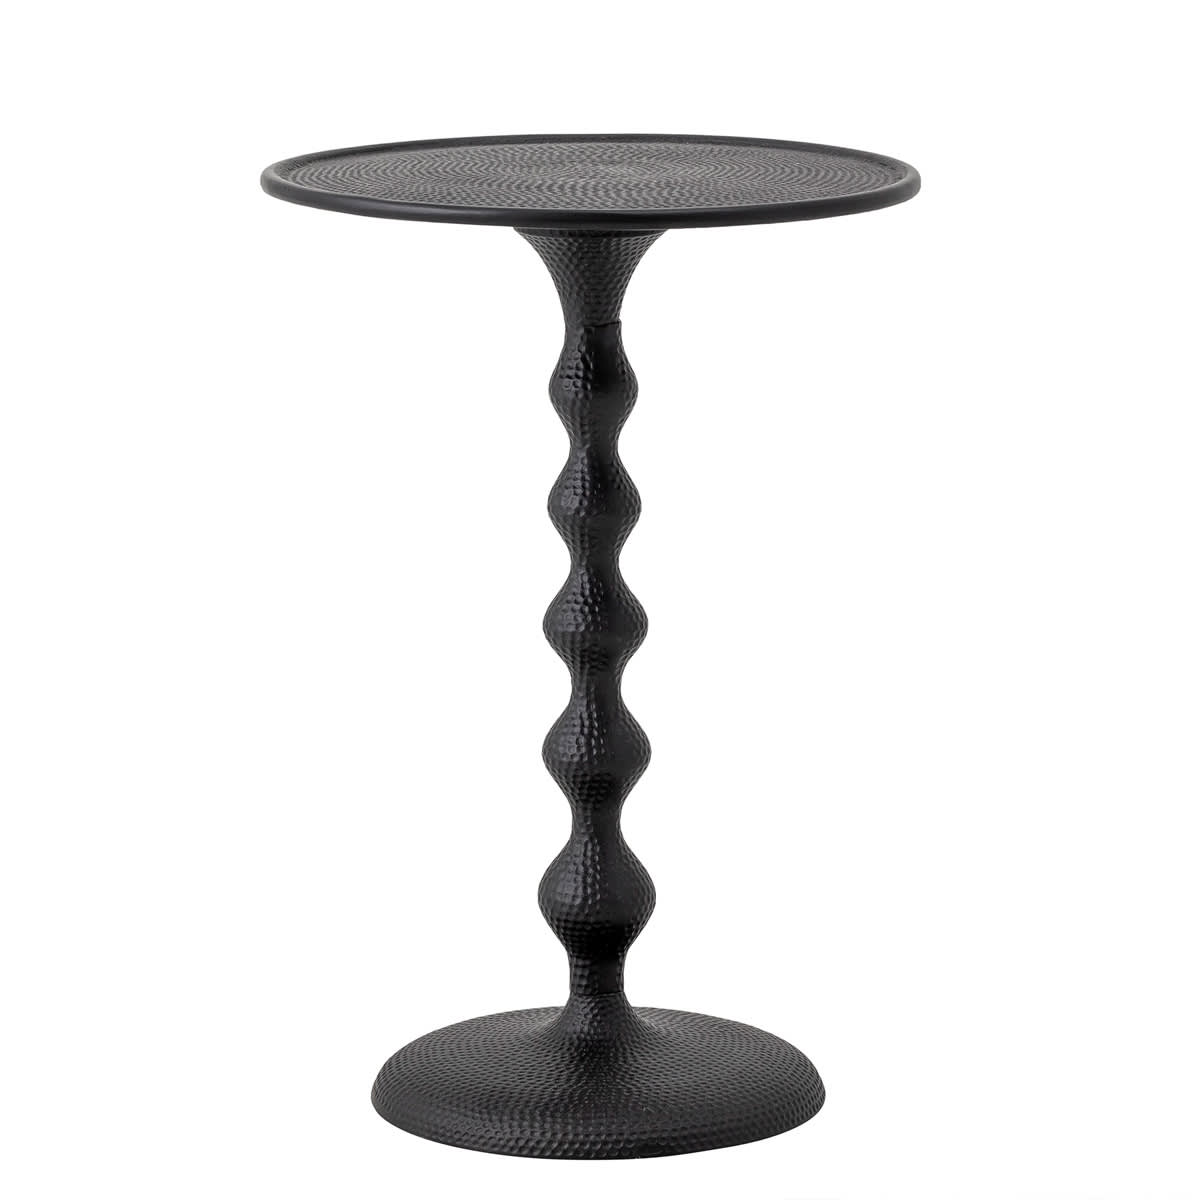 Anka Side Table - Black - Angle View by Bloomingville